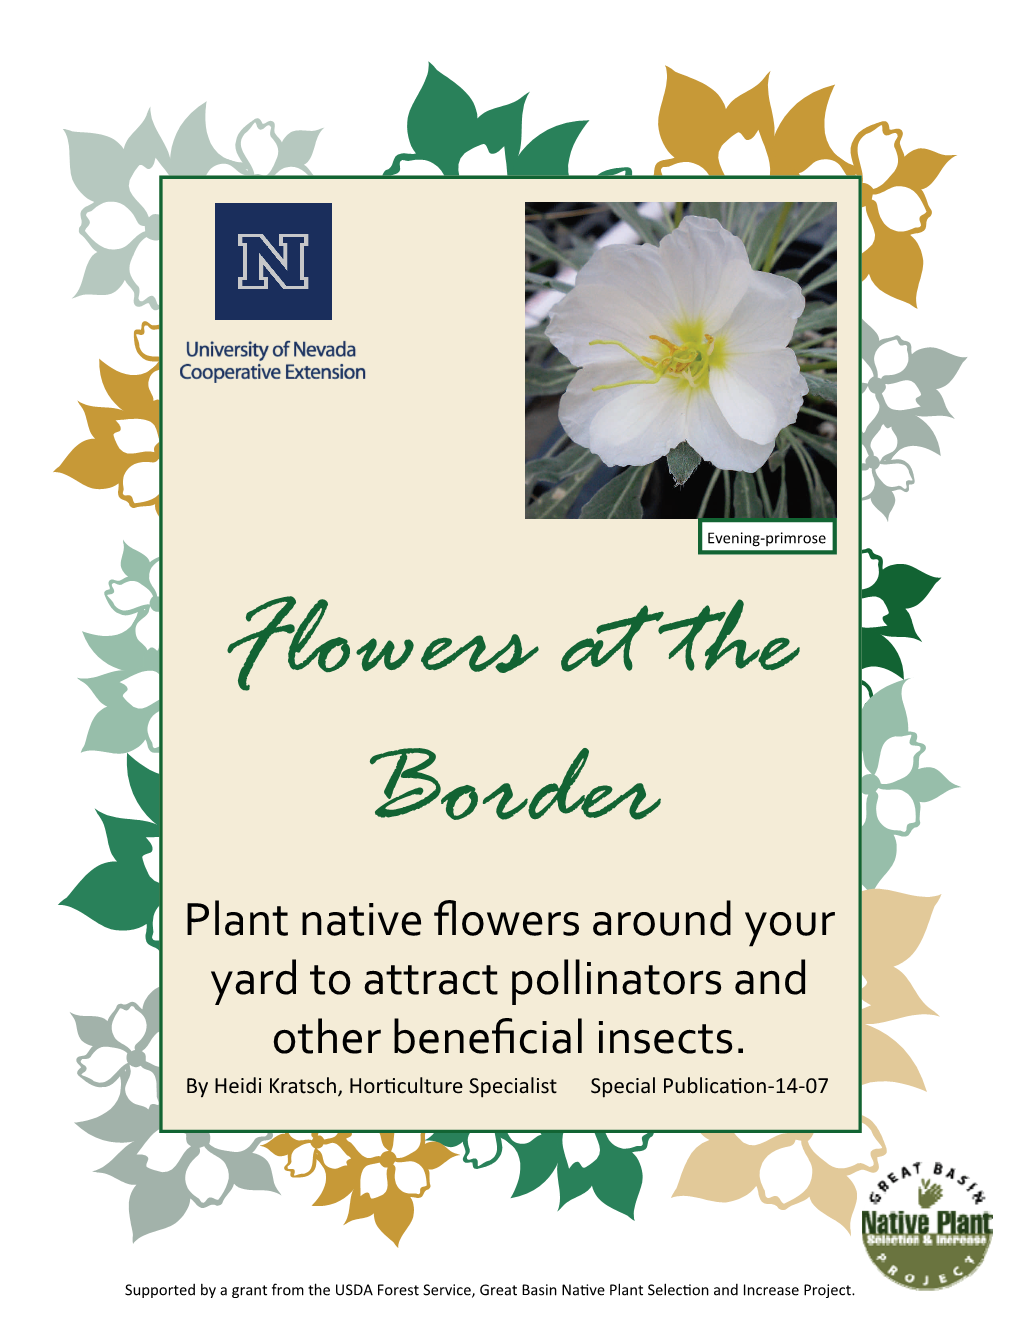 Flowers at the Border Plant Native ﬂowers Around Your Yard to Attract Pollinators and Other Beneﬁcial Insects